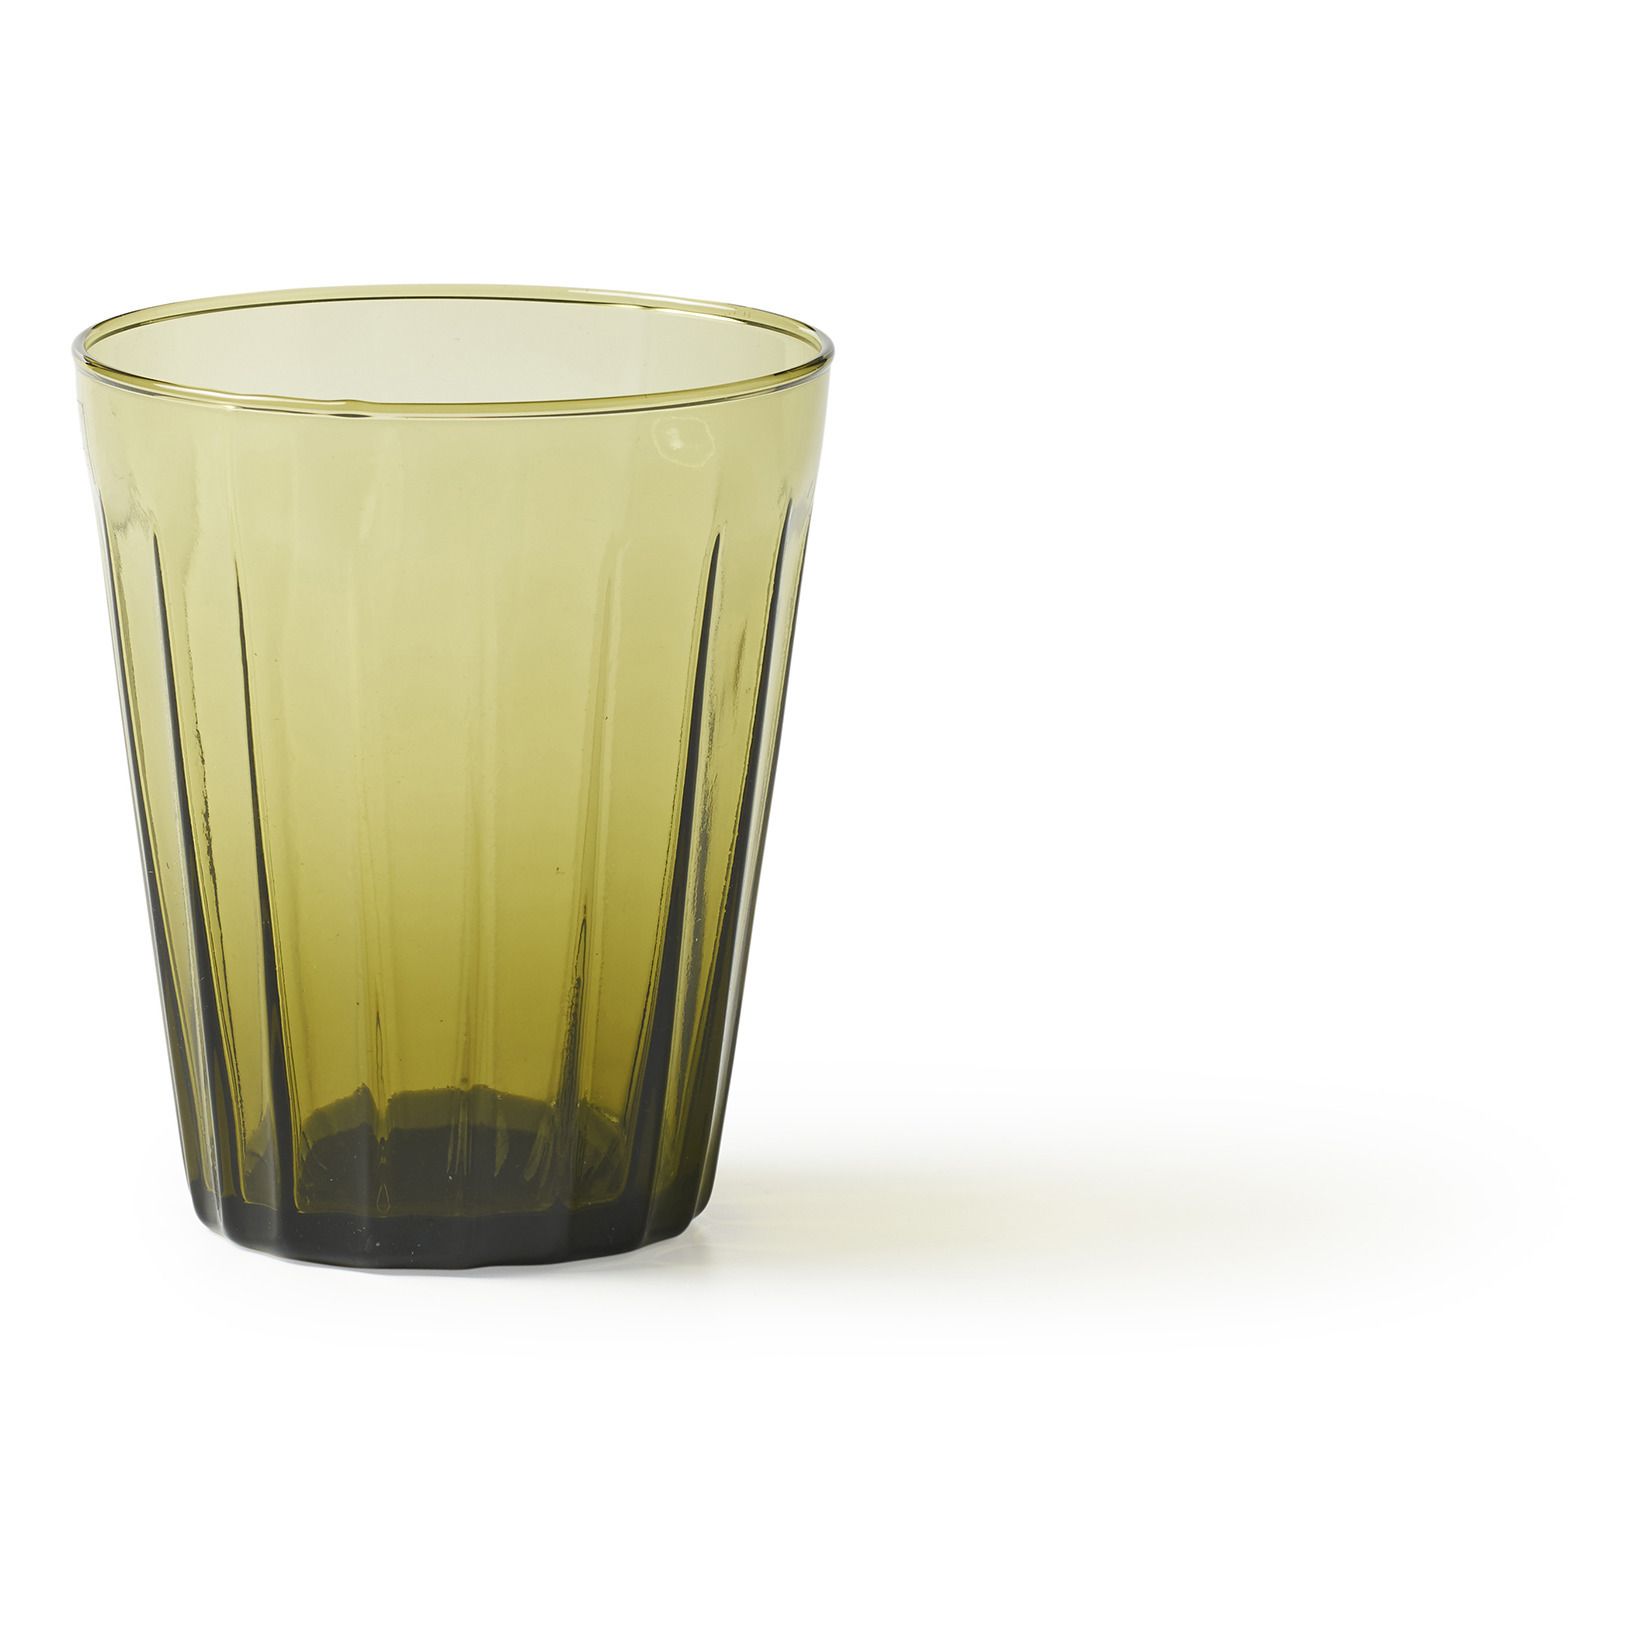 Lucca water glass - Olive green